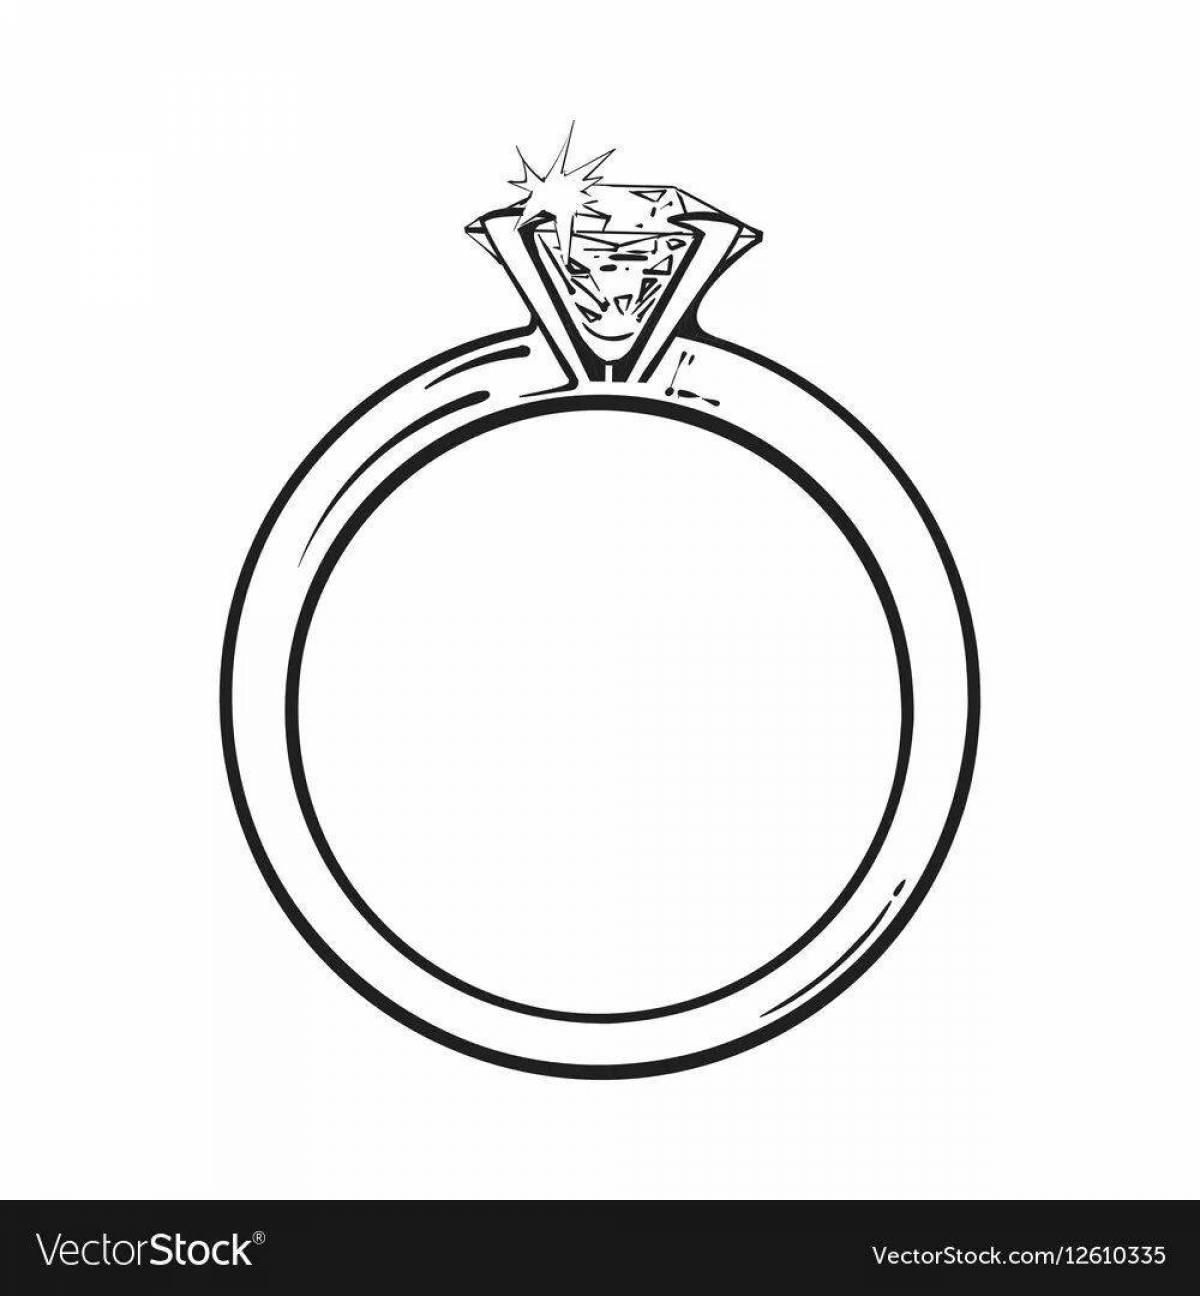 Coloring page elegant ring with stone